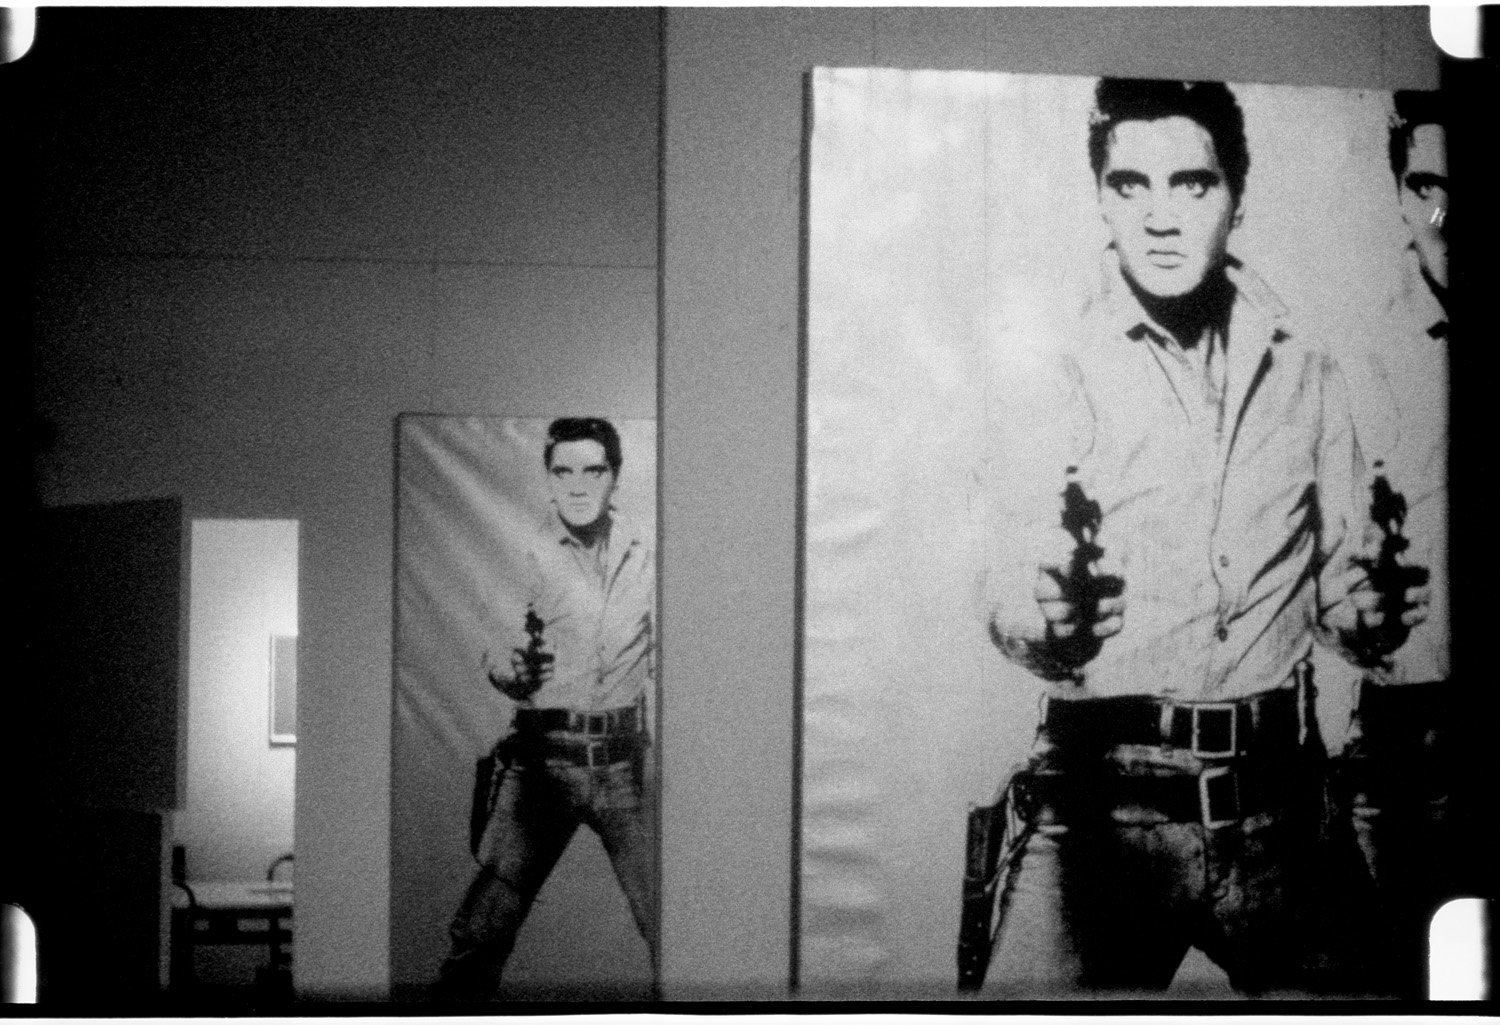 Andy Warhol (1928–1987), Elvis at Ferus, 1963. 16mm, b&w, silent; 4.0 min. @ 16 fps, 3.5 min. @ 18 fps © 2018 The Andy Warhol Museum, Pittsburgh, PA, a museum of Carnegie Institute. All rights reserved